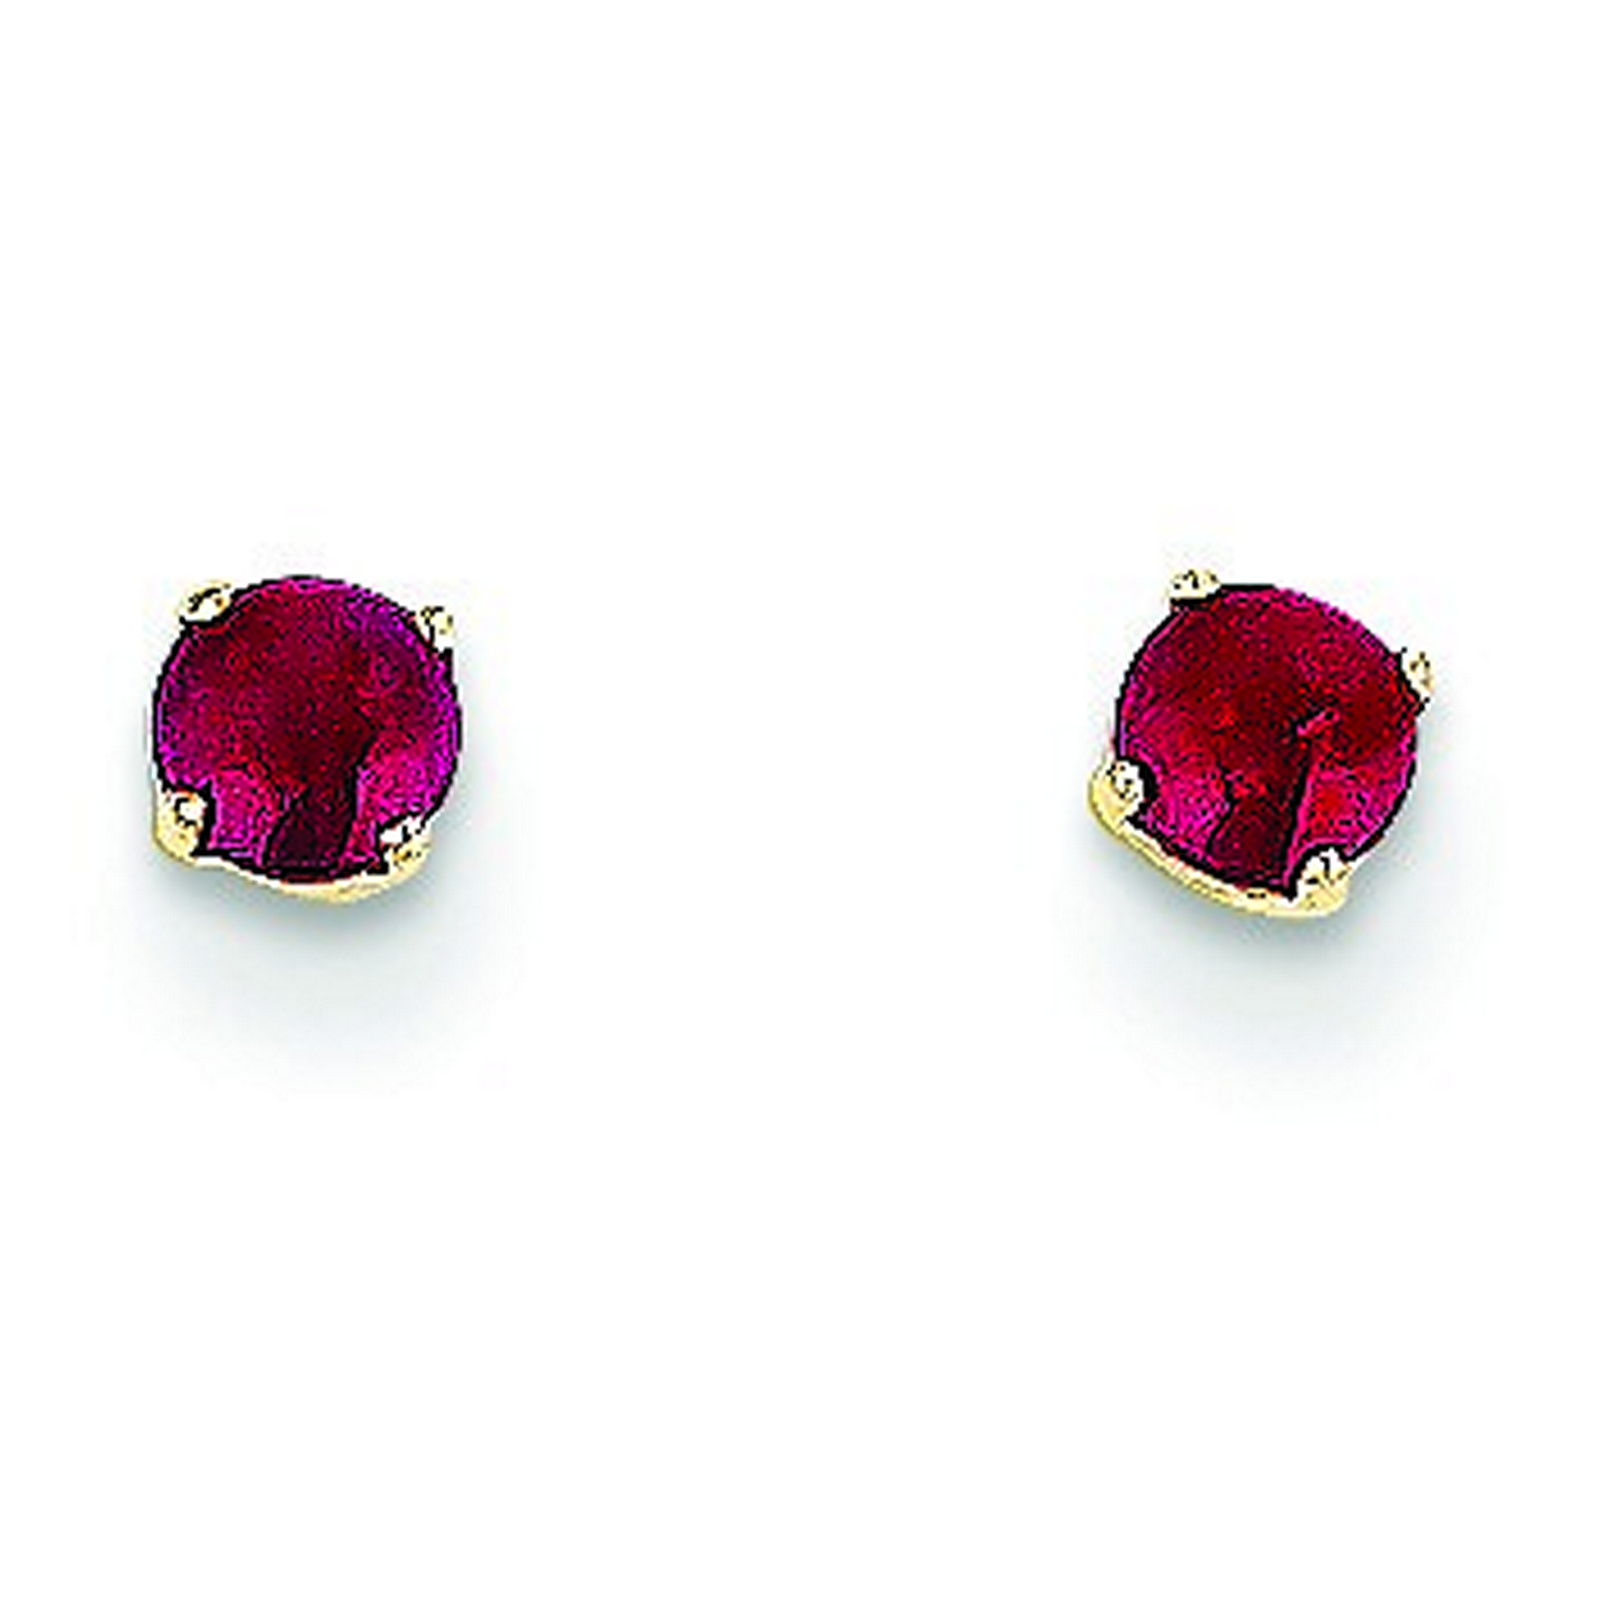 14k Yellow Gold 3mm Round July Birthstone Ruby Post Earrings